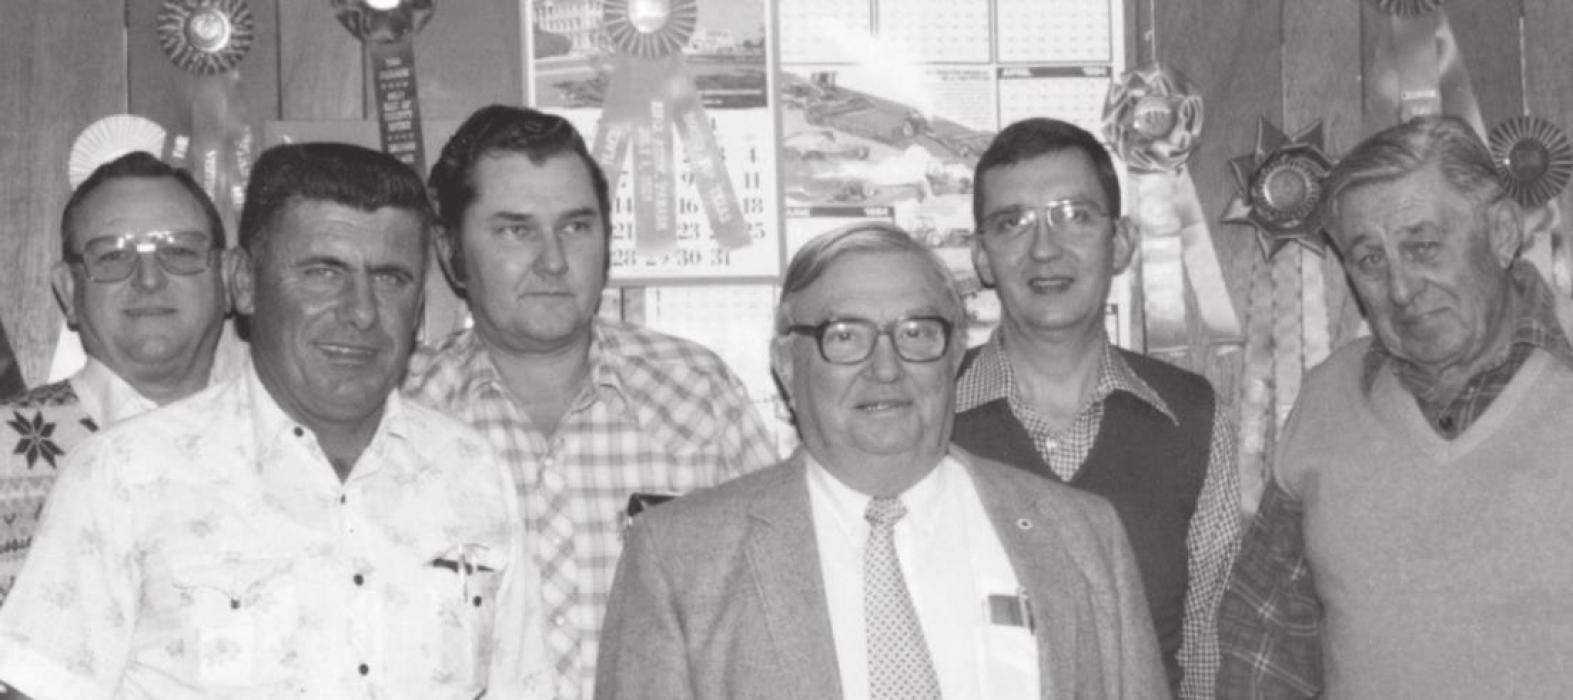 The 1985 Fayette County Fair Association Board officers were (left to right): Harvey Dippel, second first president; Leo Wick, president; Theo Svec, first vice president; Aubrey (Red) Voelkel, treasurer; William (Billy) Koehl, secretary; and R.J. (Dick) Edwards, general manager. Photo courtesy of the Fayette Heritage Museum and Archives